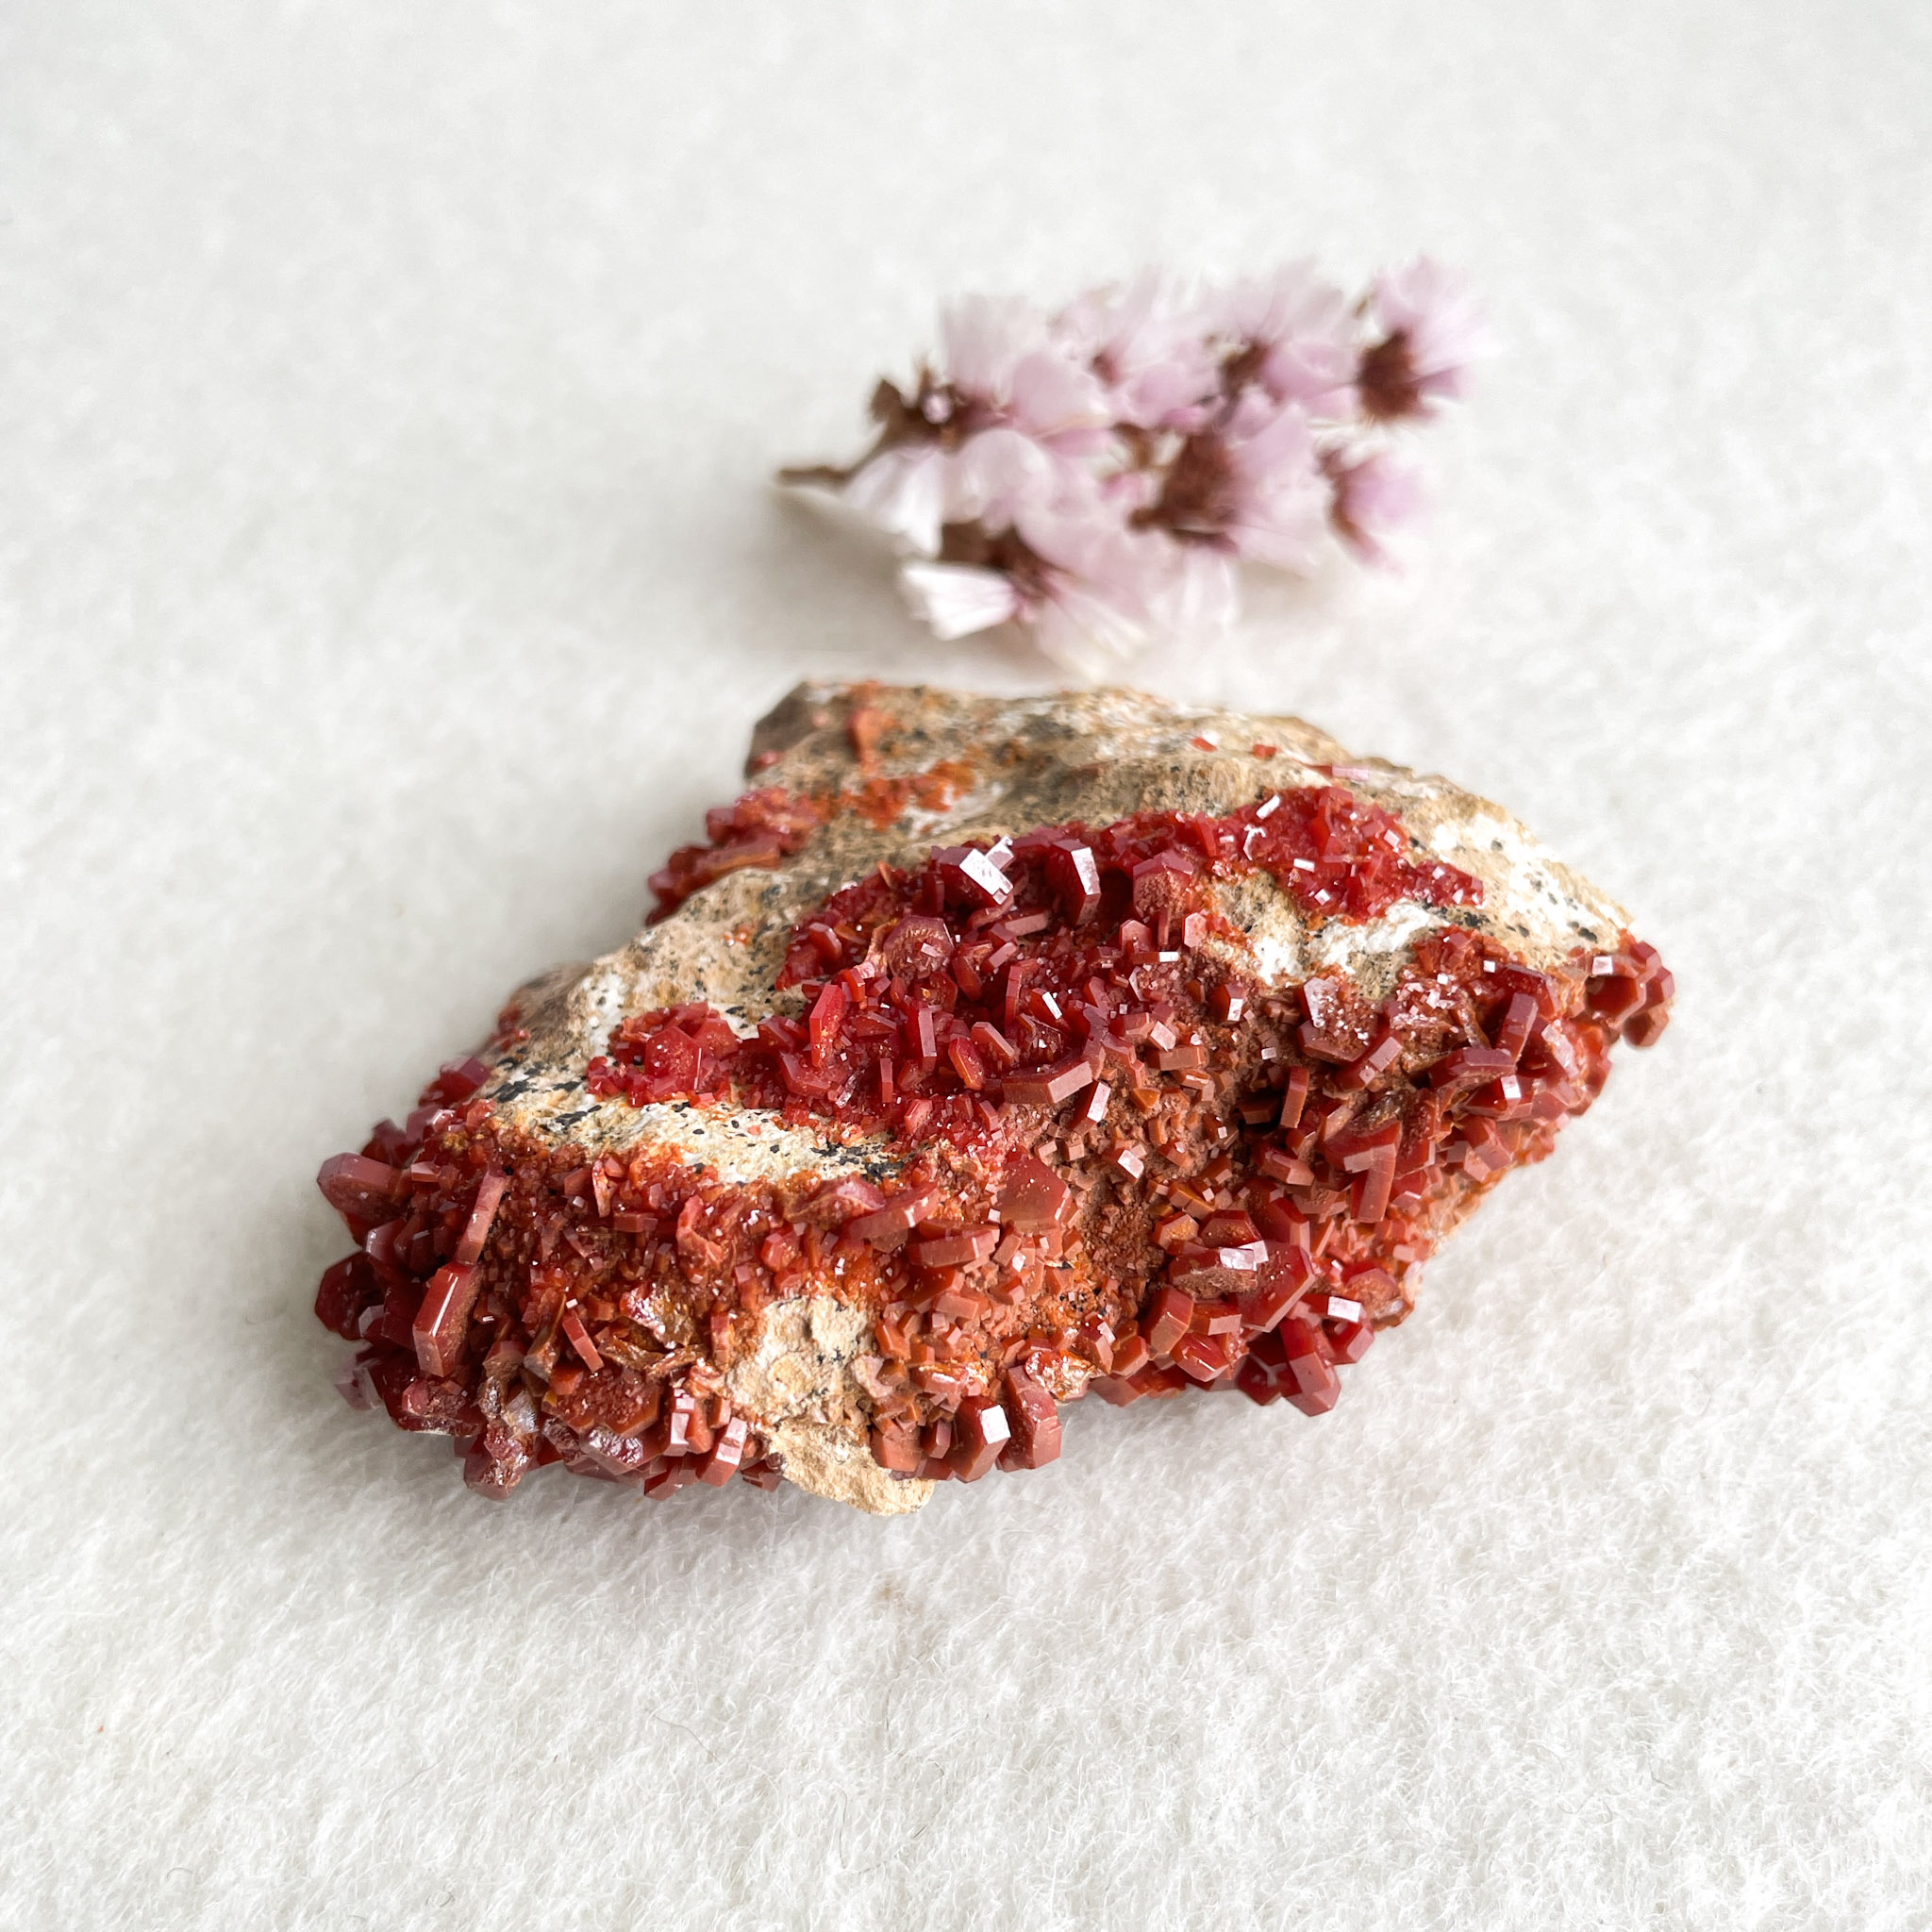 A red vanadinite crystal cluster on a rock matrix with a small bouquet of dried pink flowers on a textured white background.